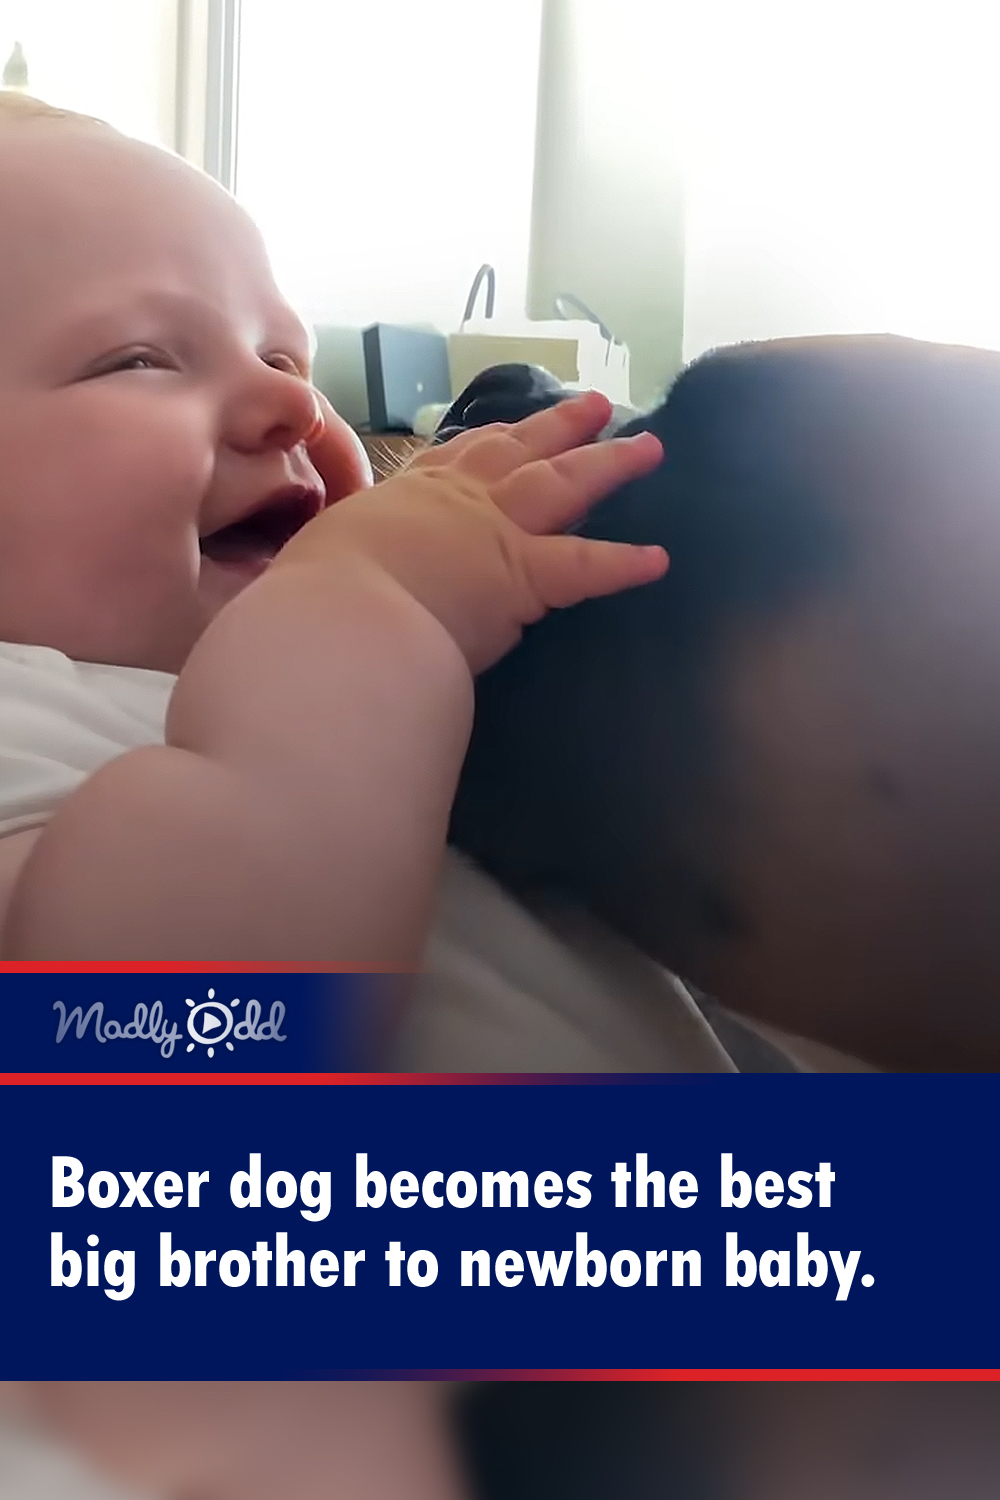 Boxer dog becomes the best big brother to newborn baby